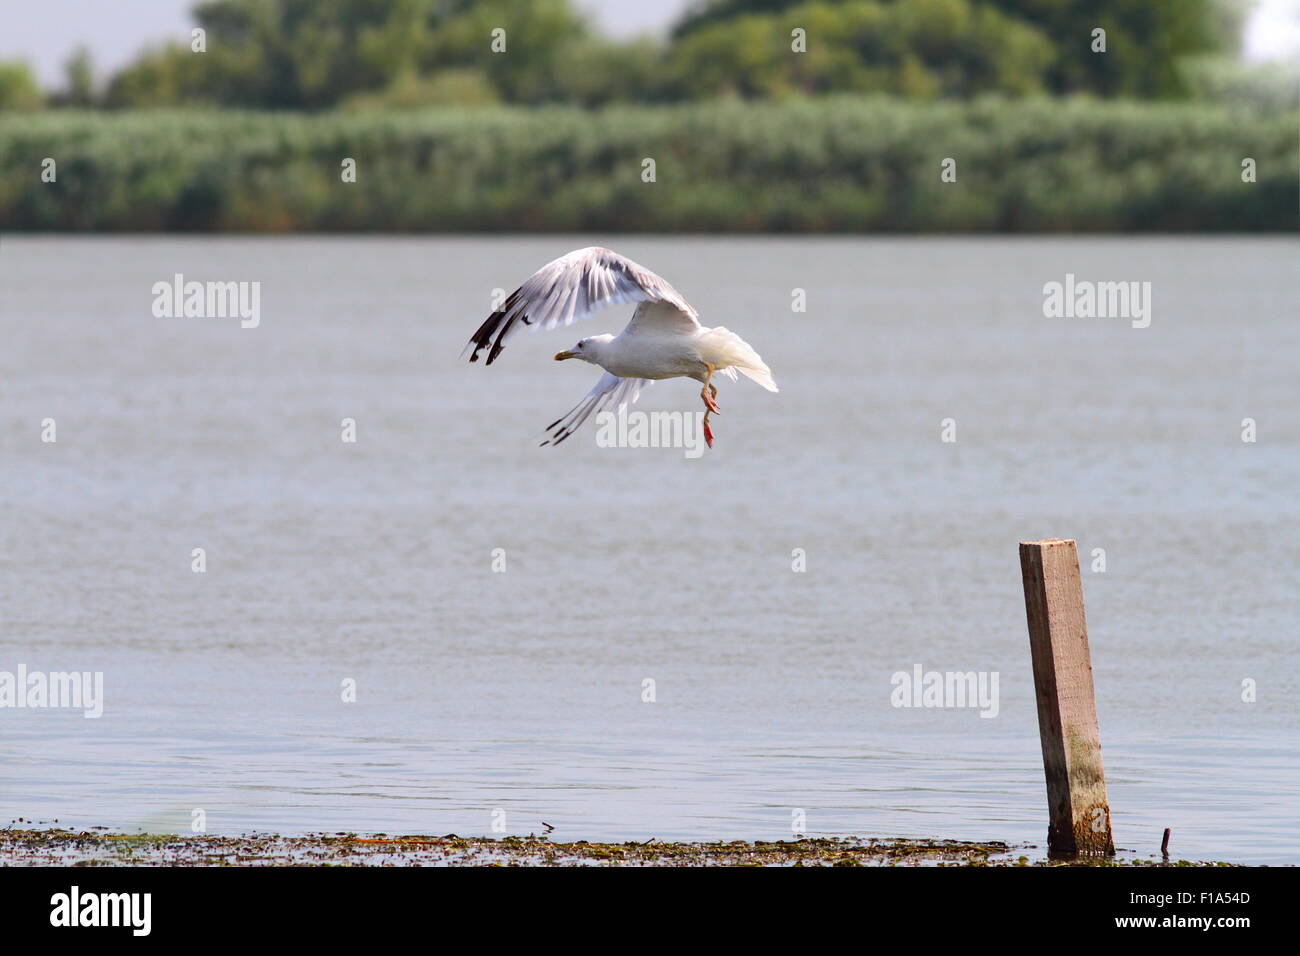 white gull taking flight from a wood pile on Danube river, Romania Stock Photo